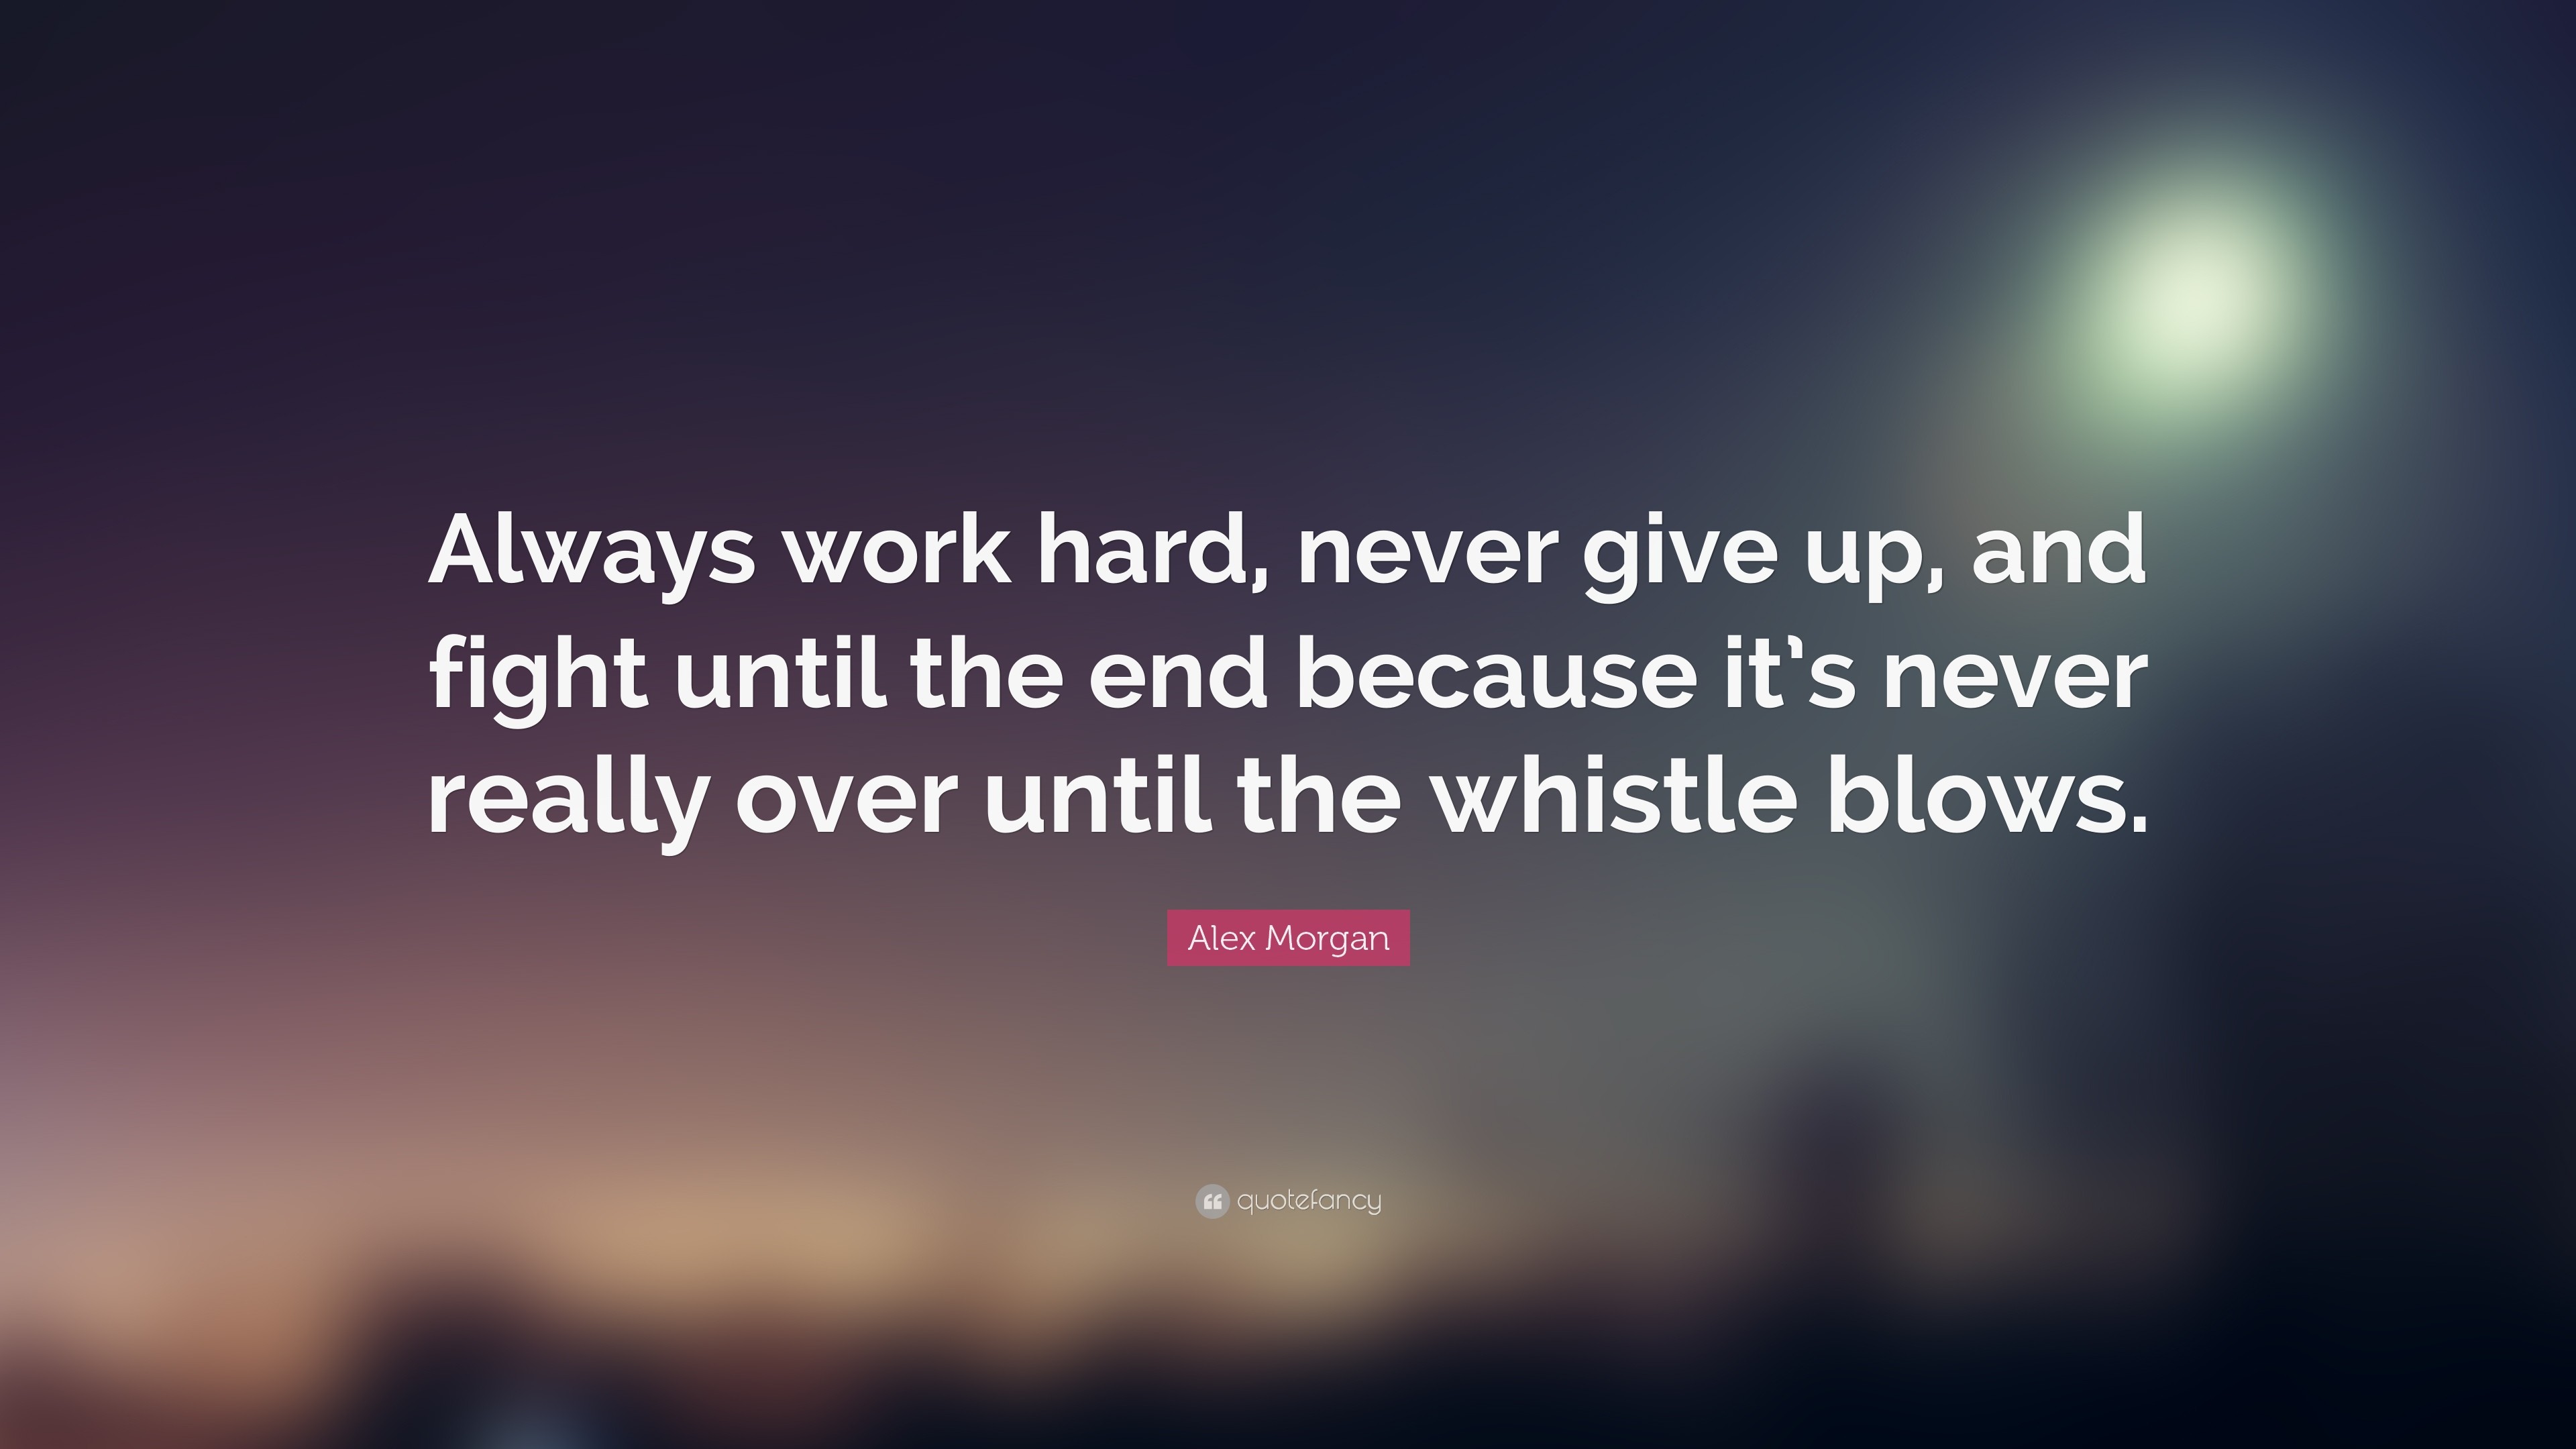 3840x2160 Alex Morgan Quote: “Always work hard, never give up, and fight until